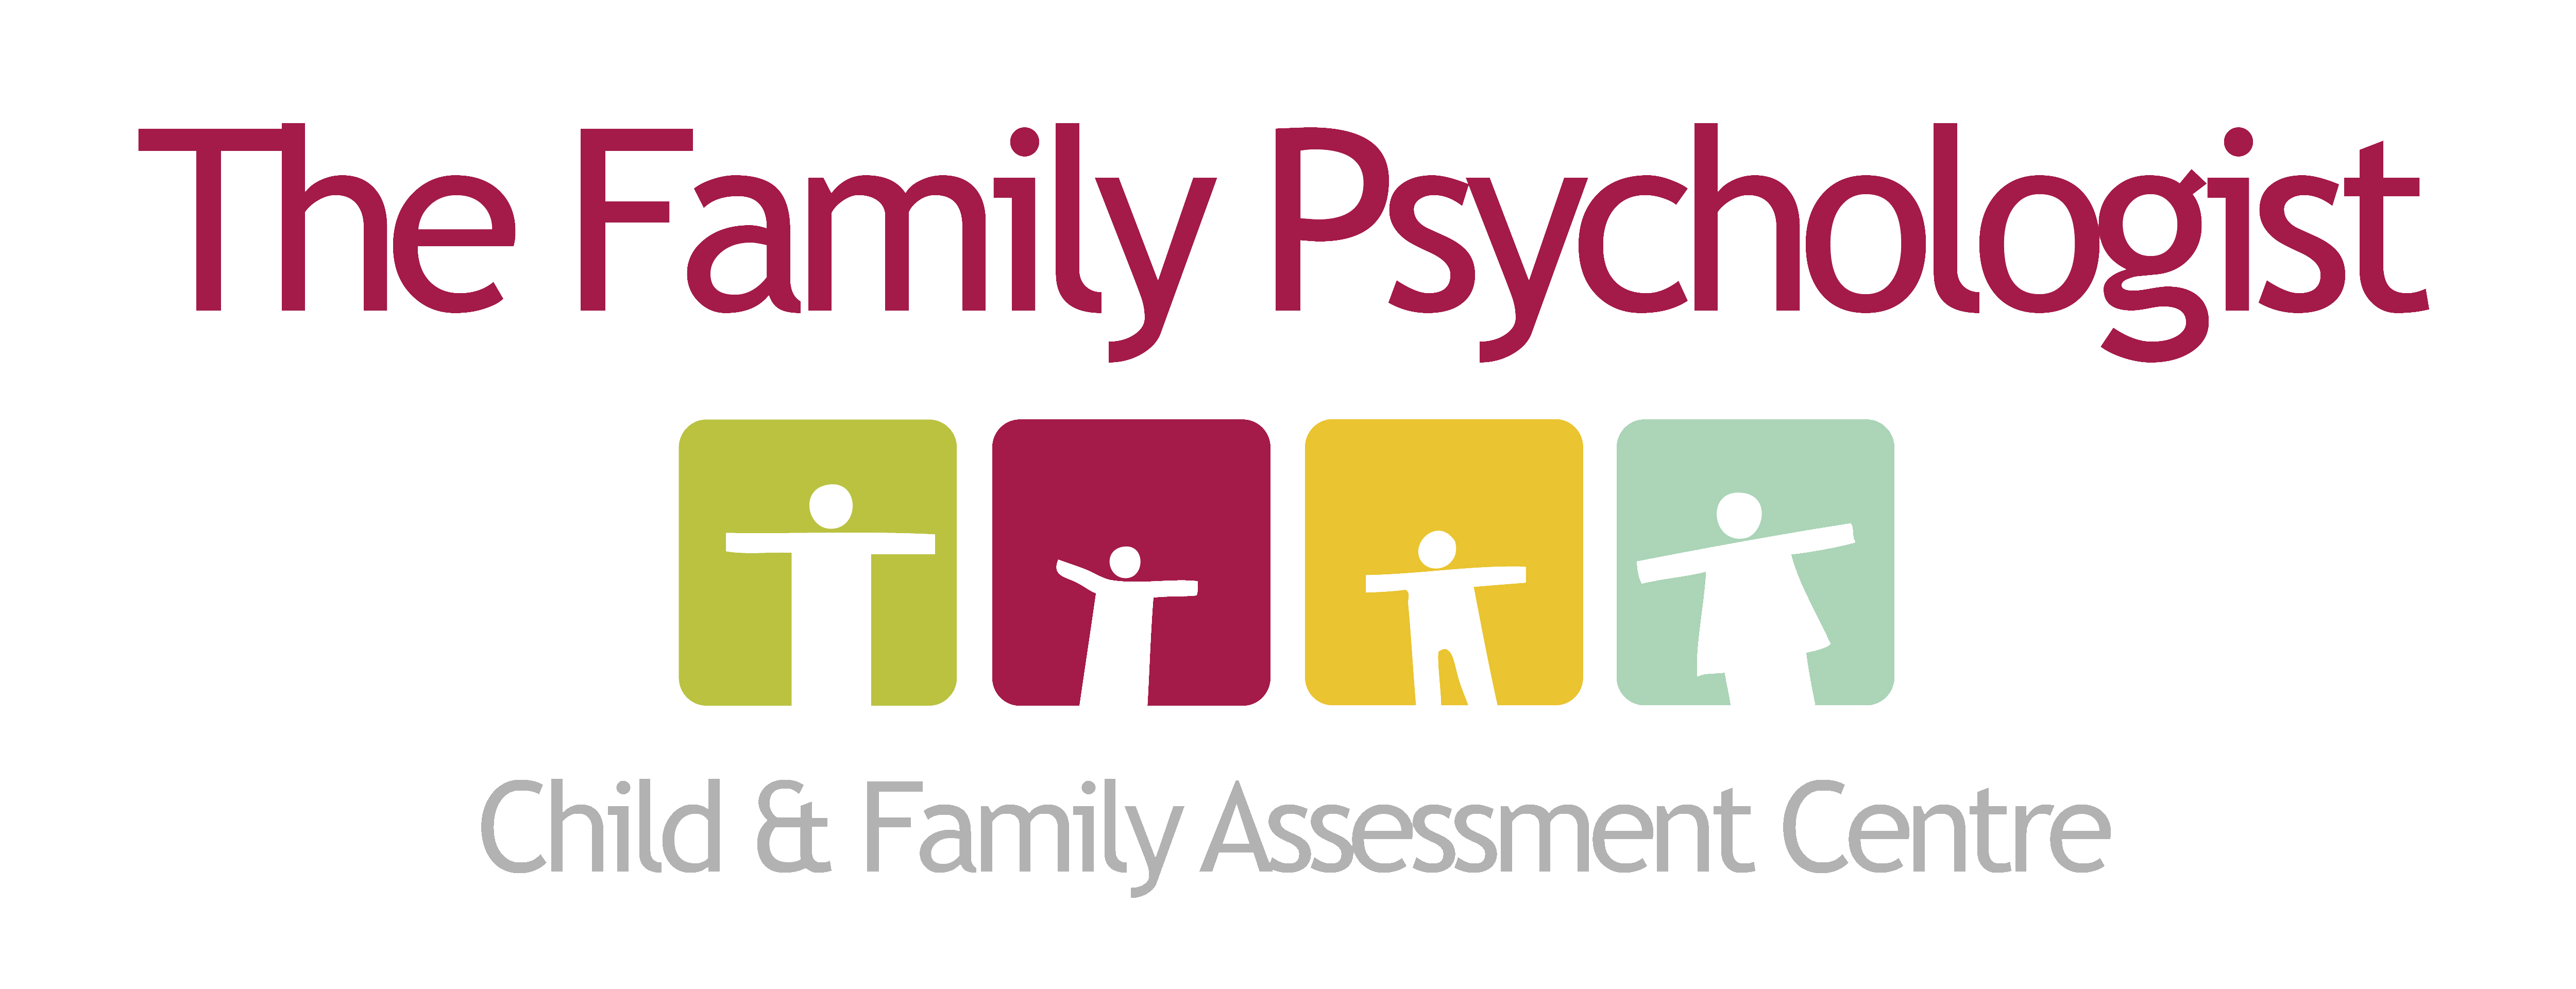 Child, Adult & The Family Psychologists – Kidderminster, serving Worcestershire and West Midlands